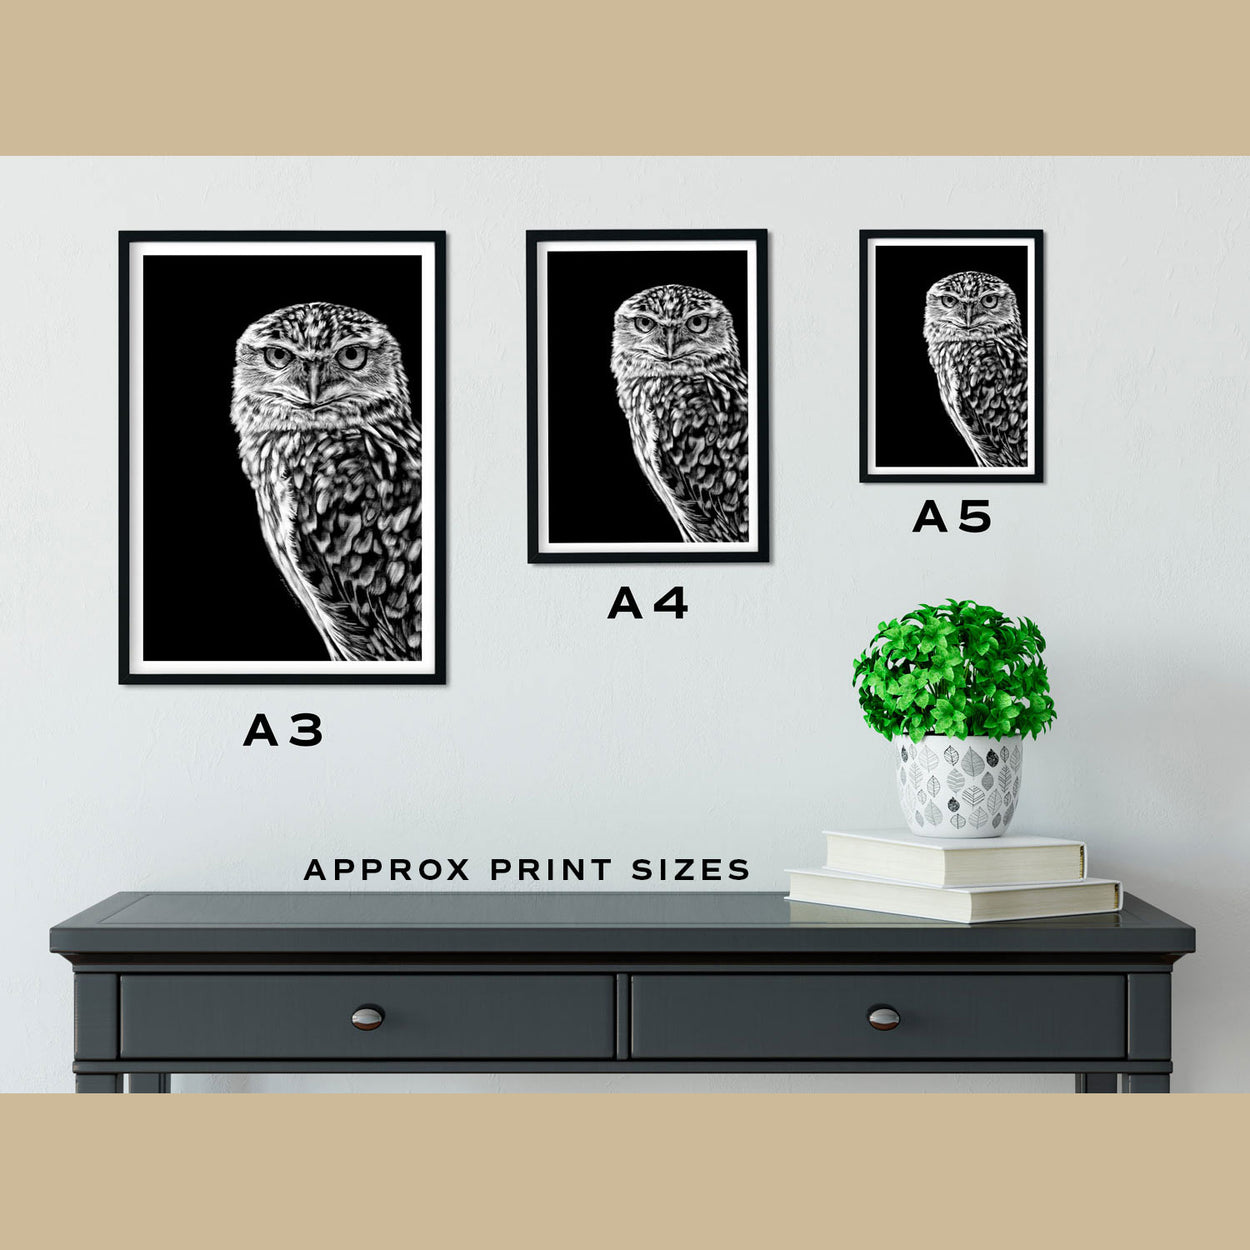 Burrowing Owl Prints Size Comparison - The Thriving Wild